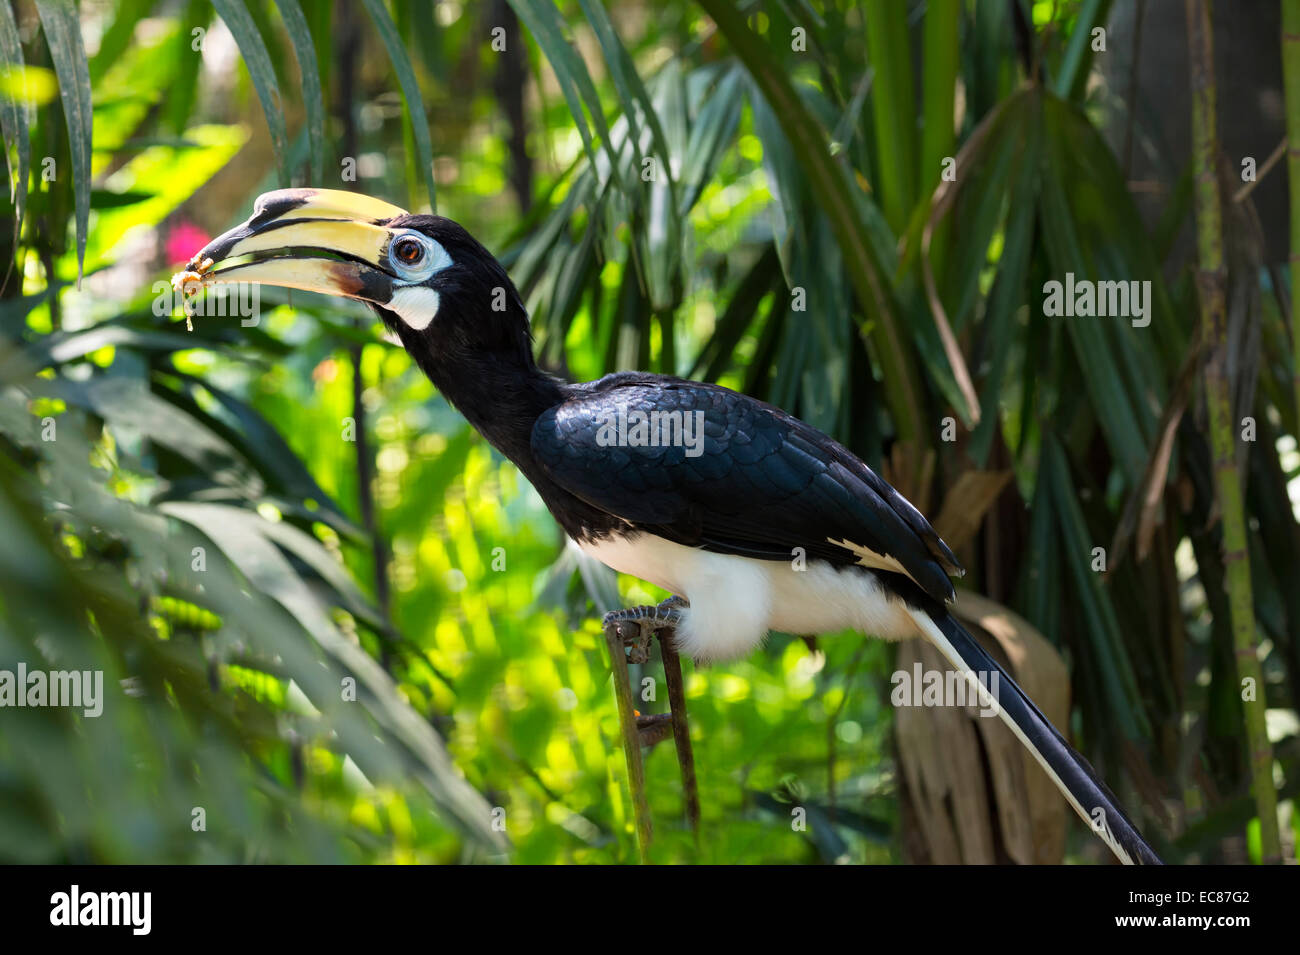 Southern Pied-Hornbill (Anthracoceros convexus), Bali Bird Park, Indonesia Stock Photo